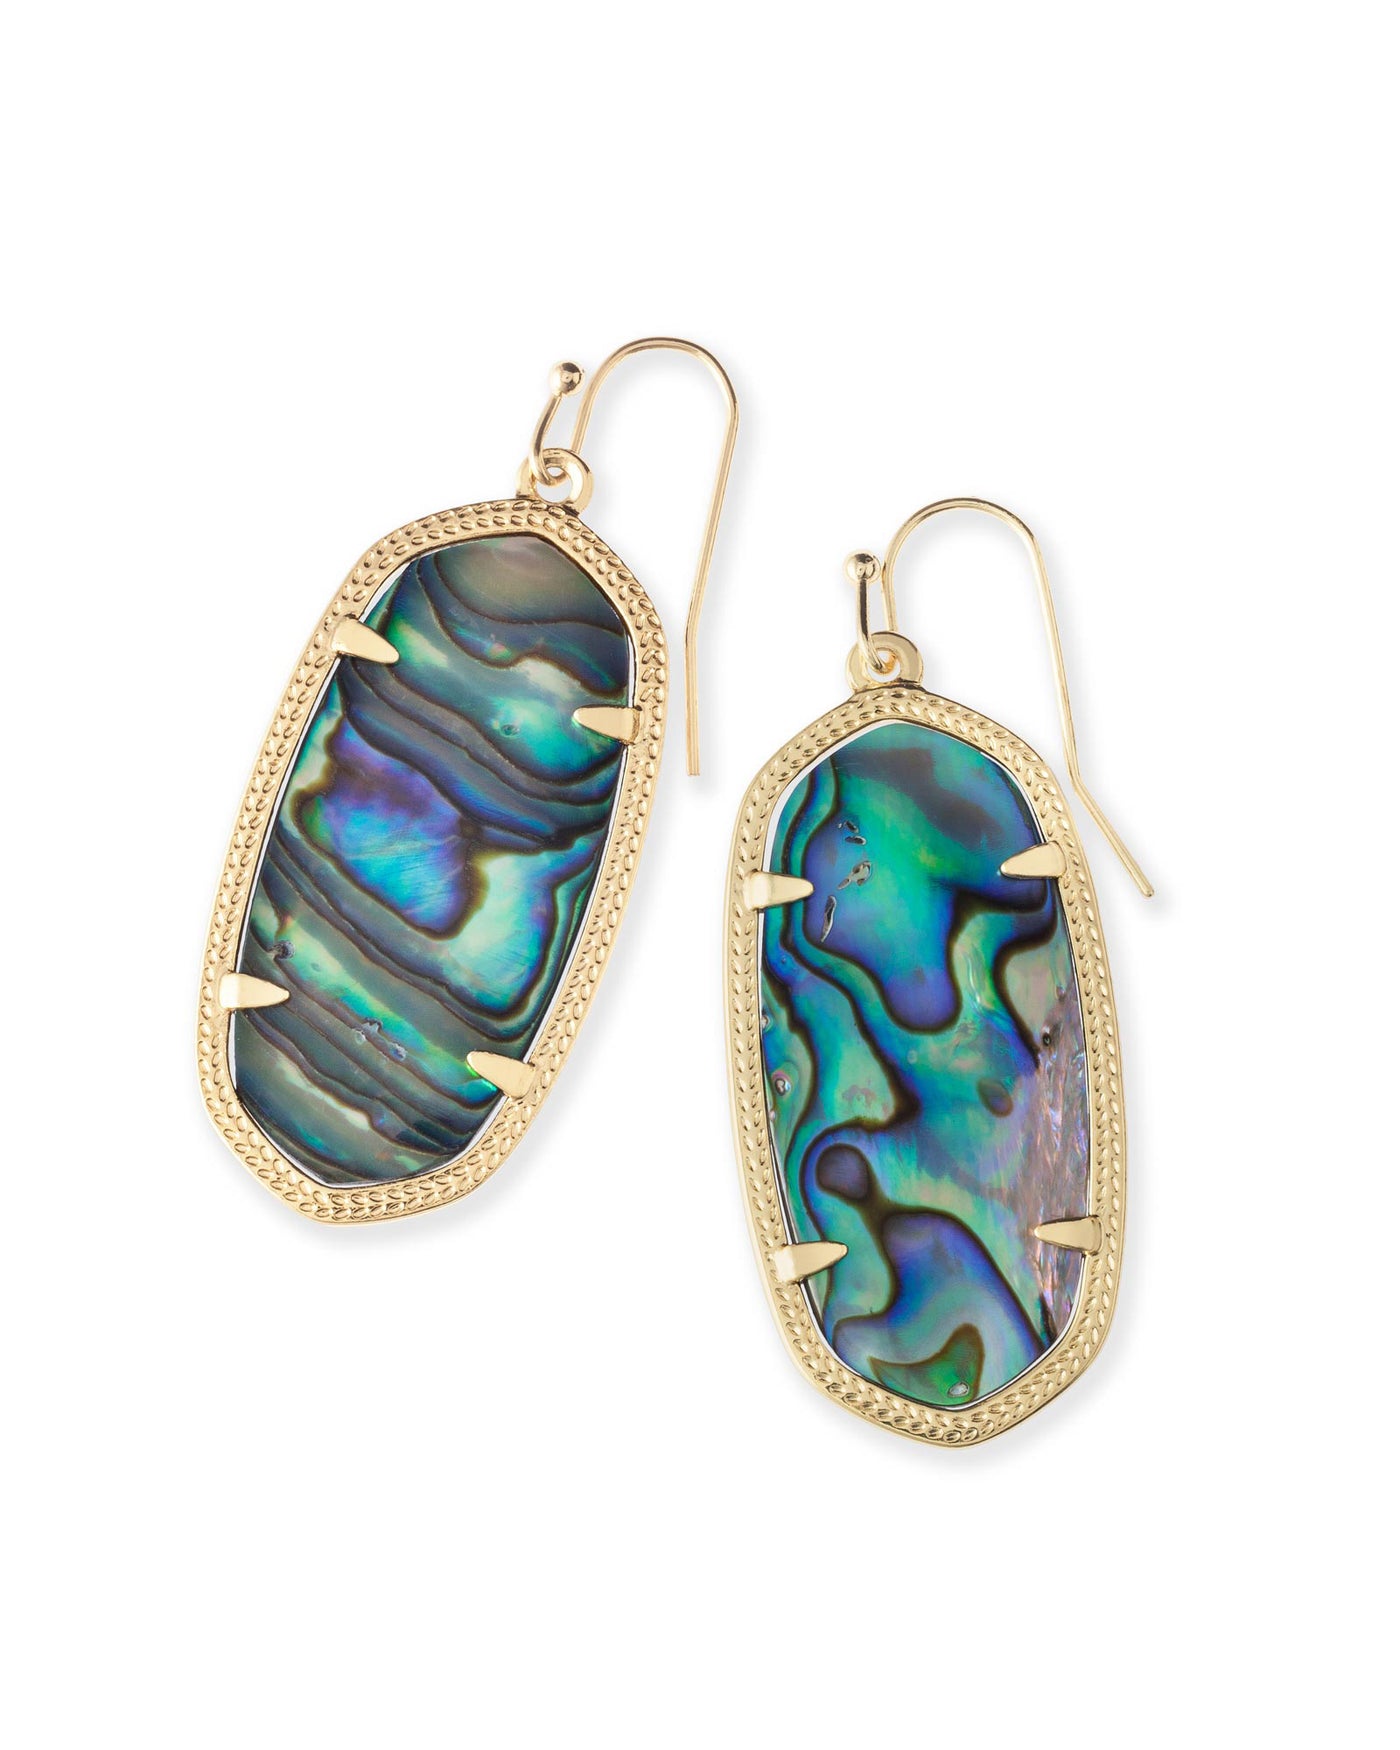 Kendra Scott Elle Gold Drop Earrings in Abalone Shell-Earrings-Kendra Scott-Market Street Nest, Fashionable Clothing, Shoes and Home Décor Located in Mabank, TX